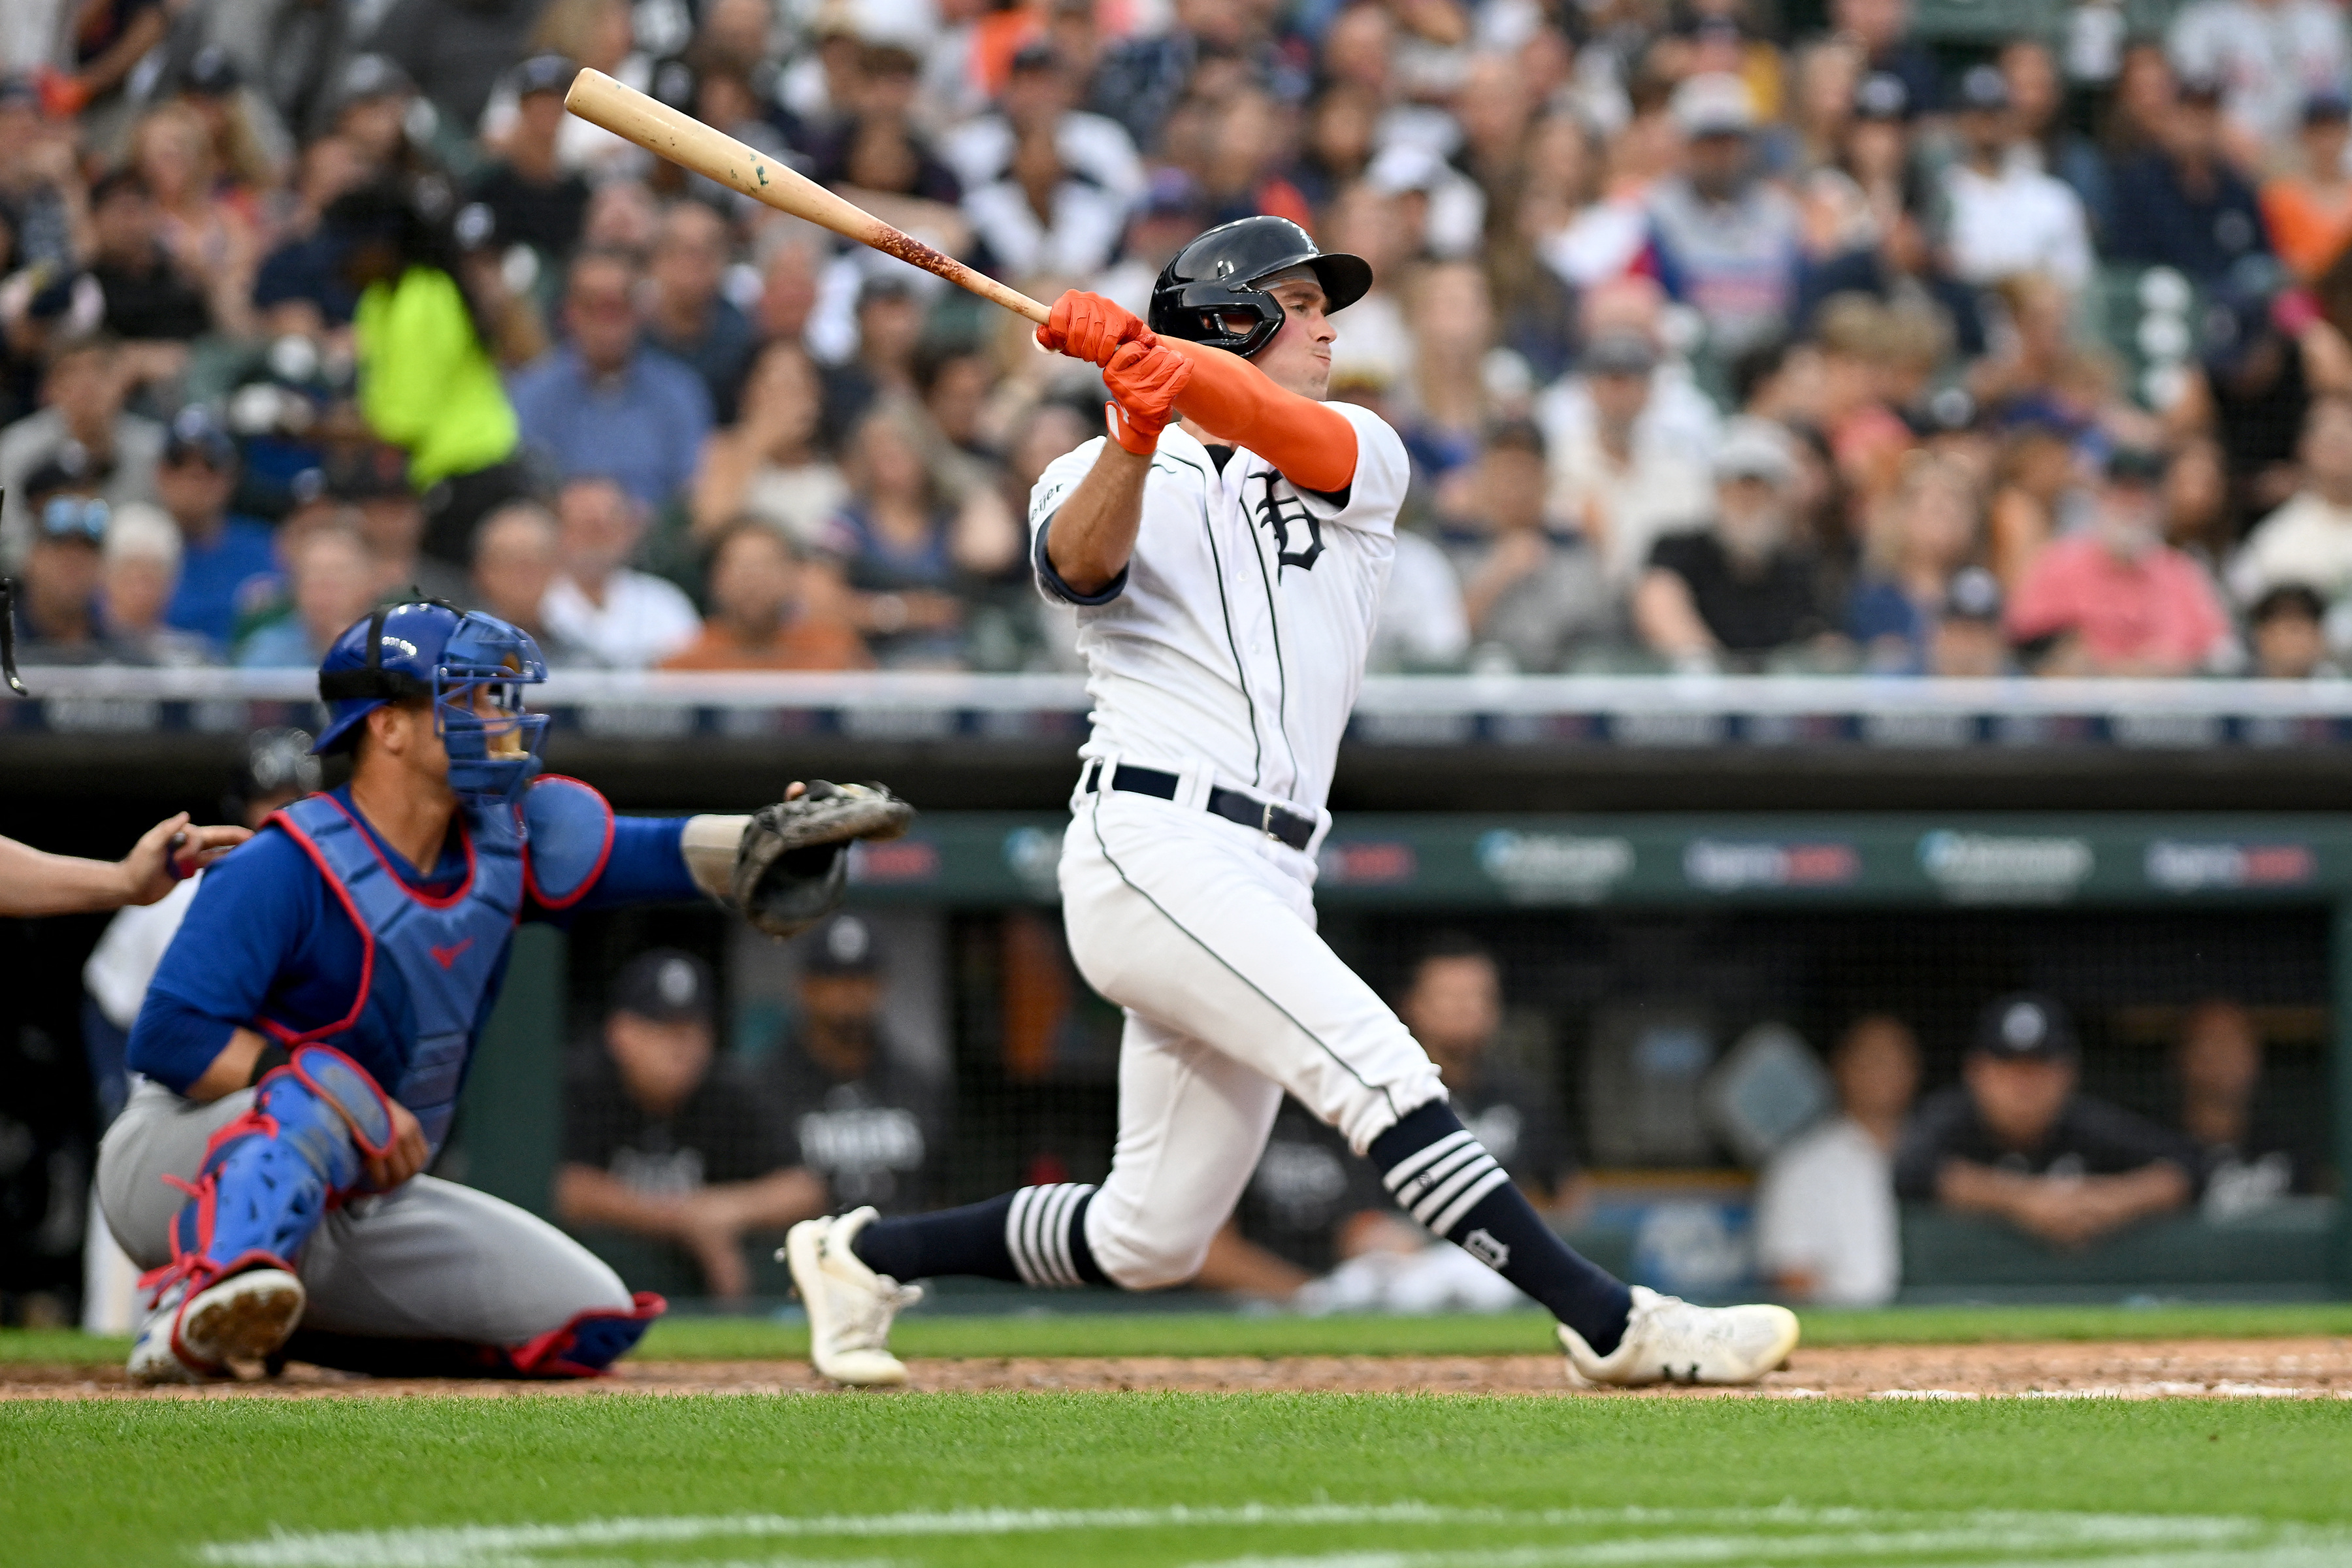 Andy Ibañez homers twice in Tigers victory over Cubs